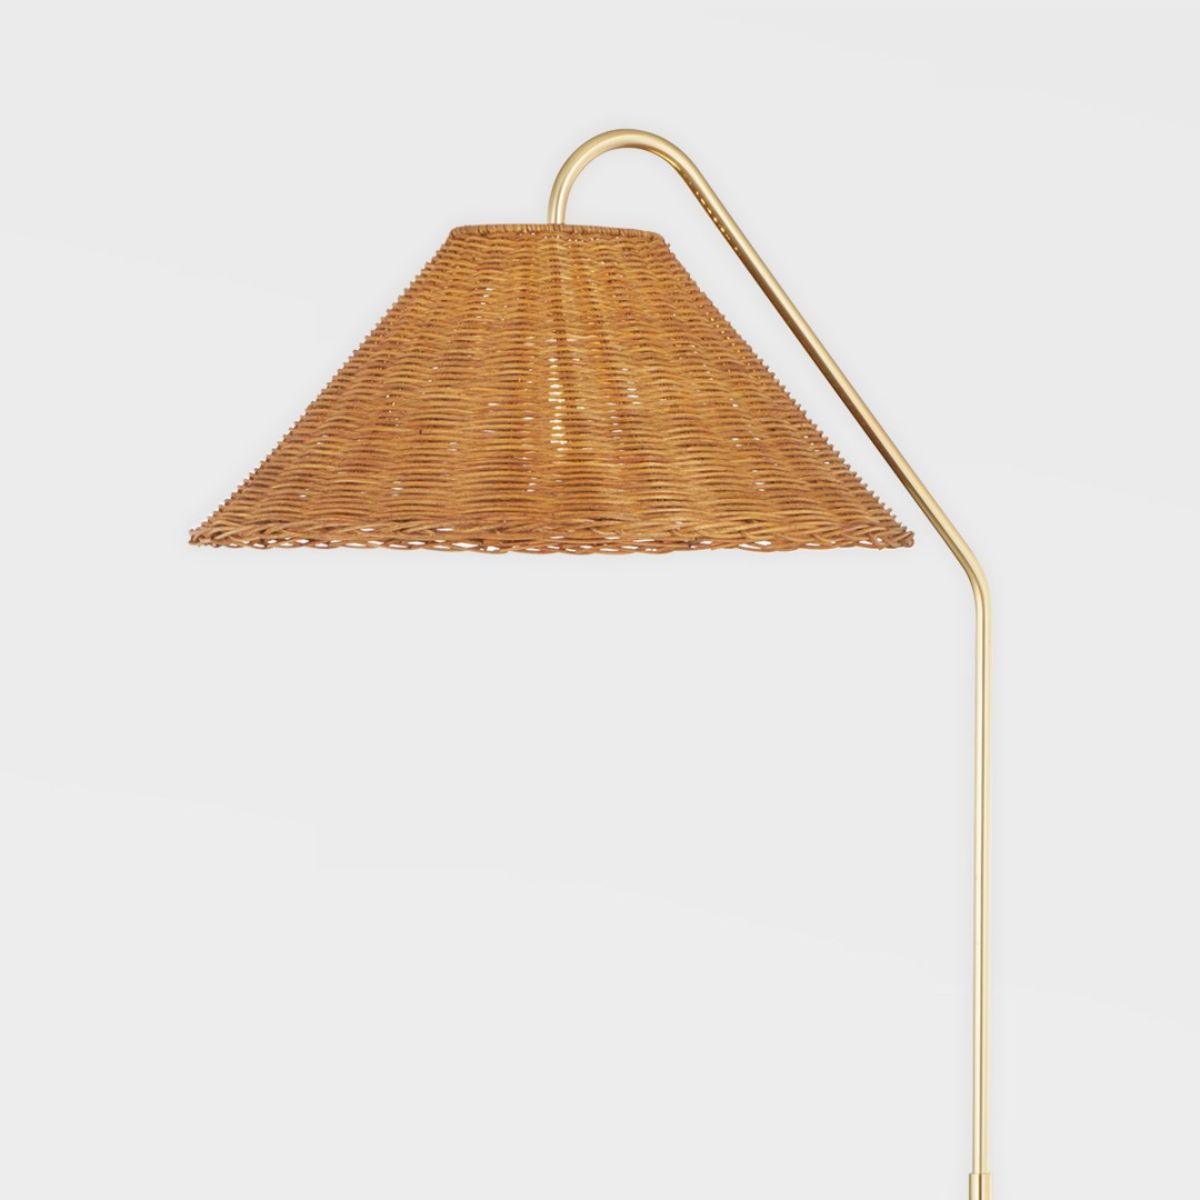 Lauren Floor Lamp Textured Black Combo and Aged Brass with Rattan Finish